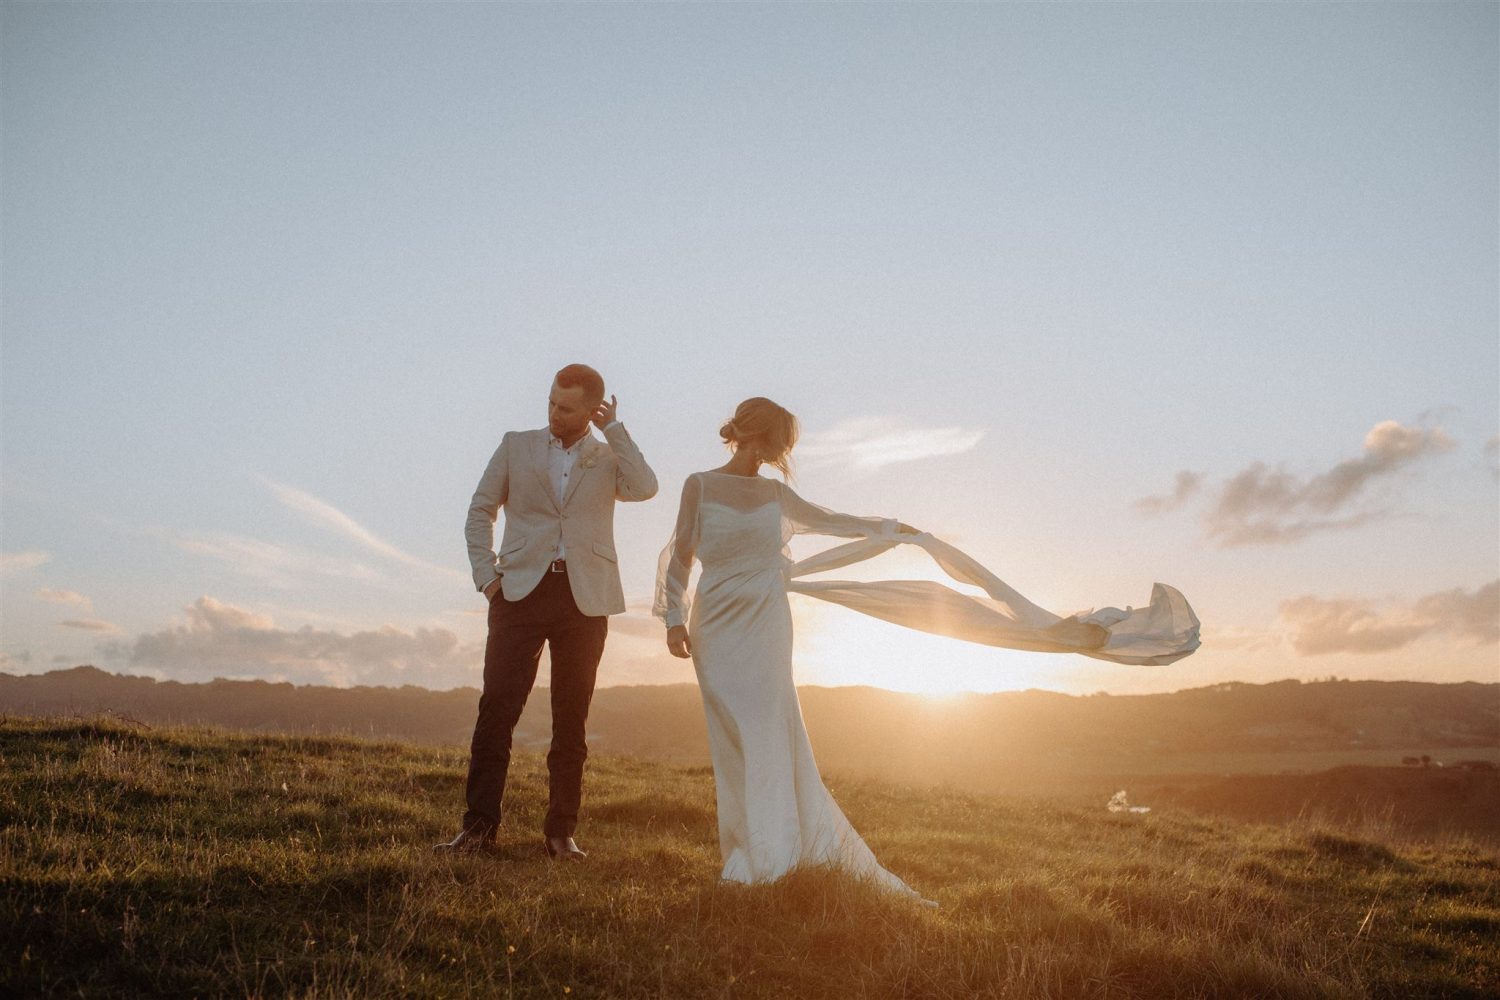 Bride and groom waiting for the sun to set feeling the fresh breeze passing them by Ana Galloway Photography